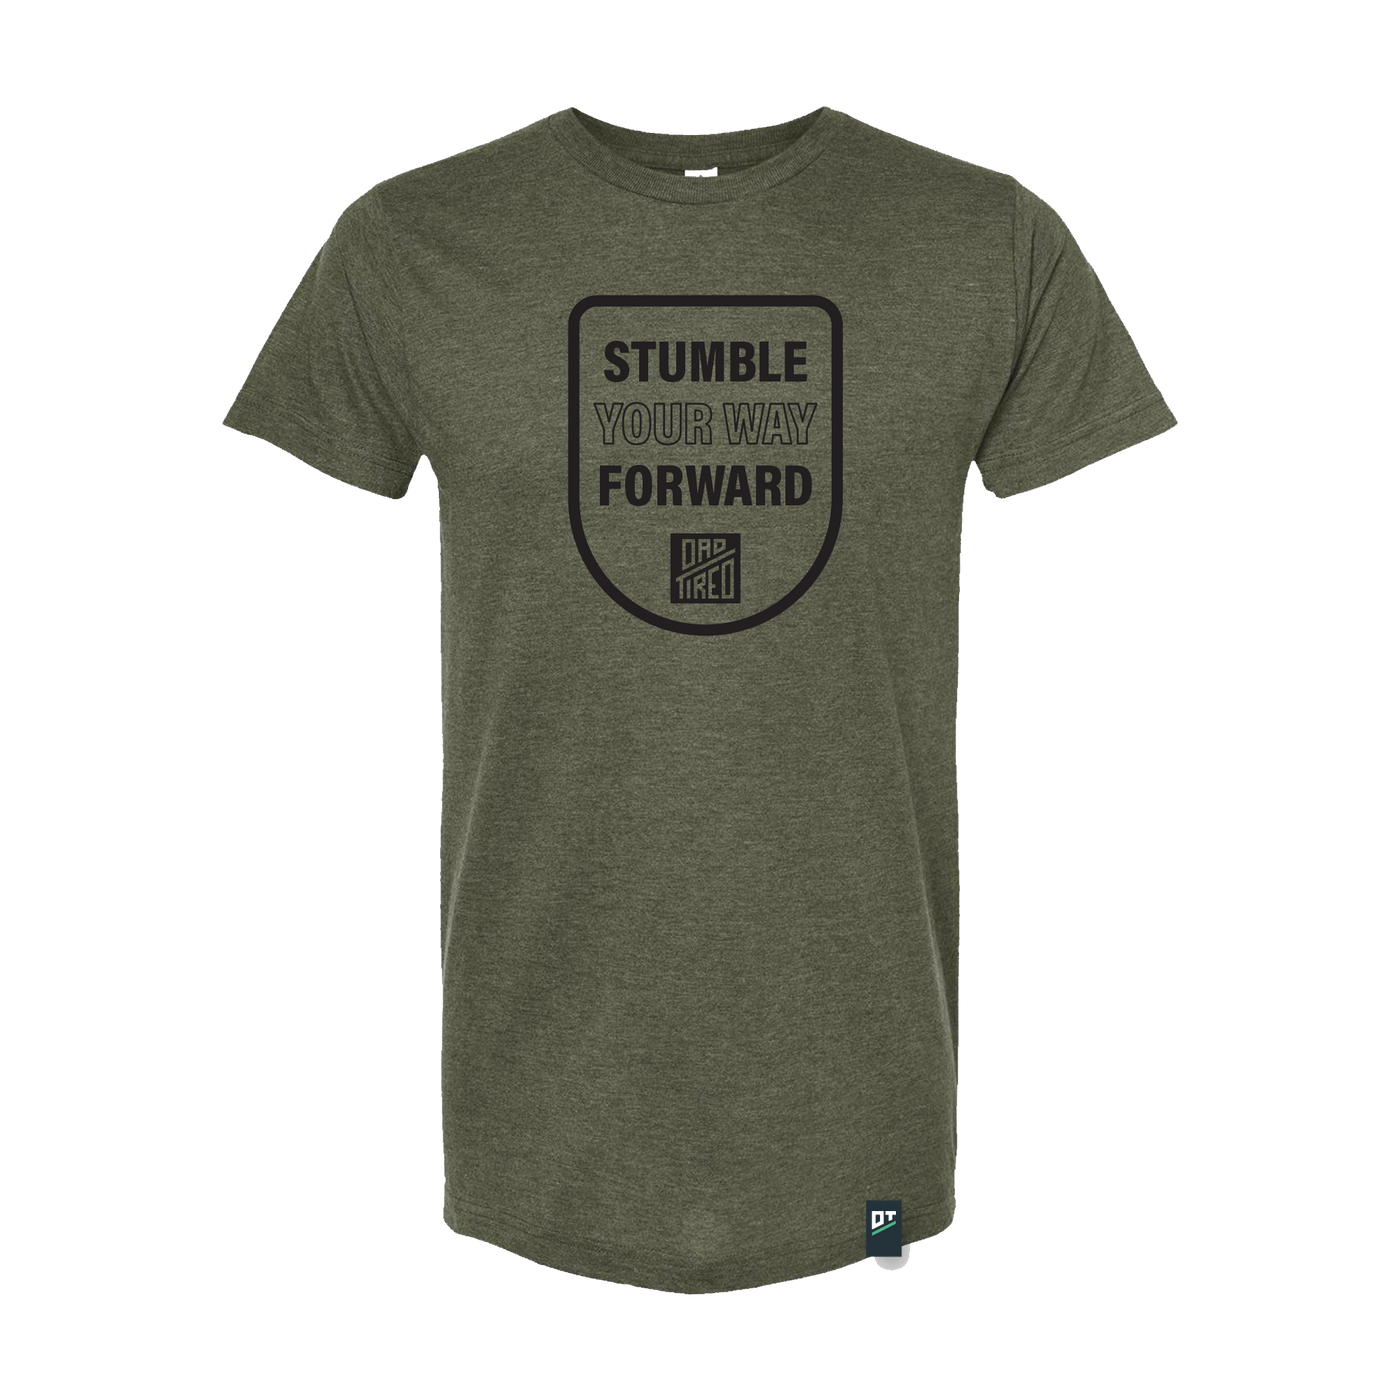 Dad Tired "Stumble Your Way Forward" Graphic Tee Shirt